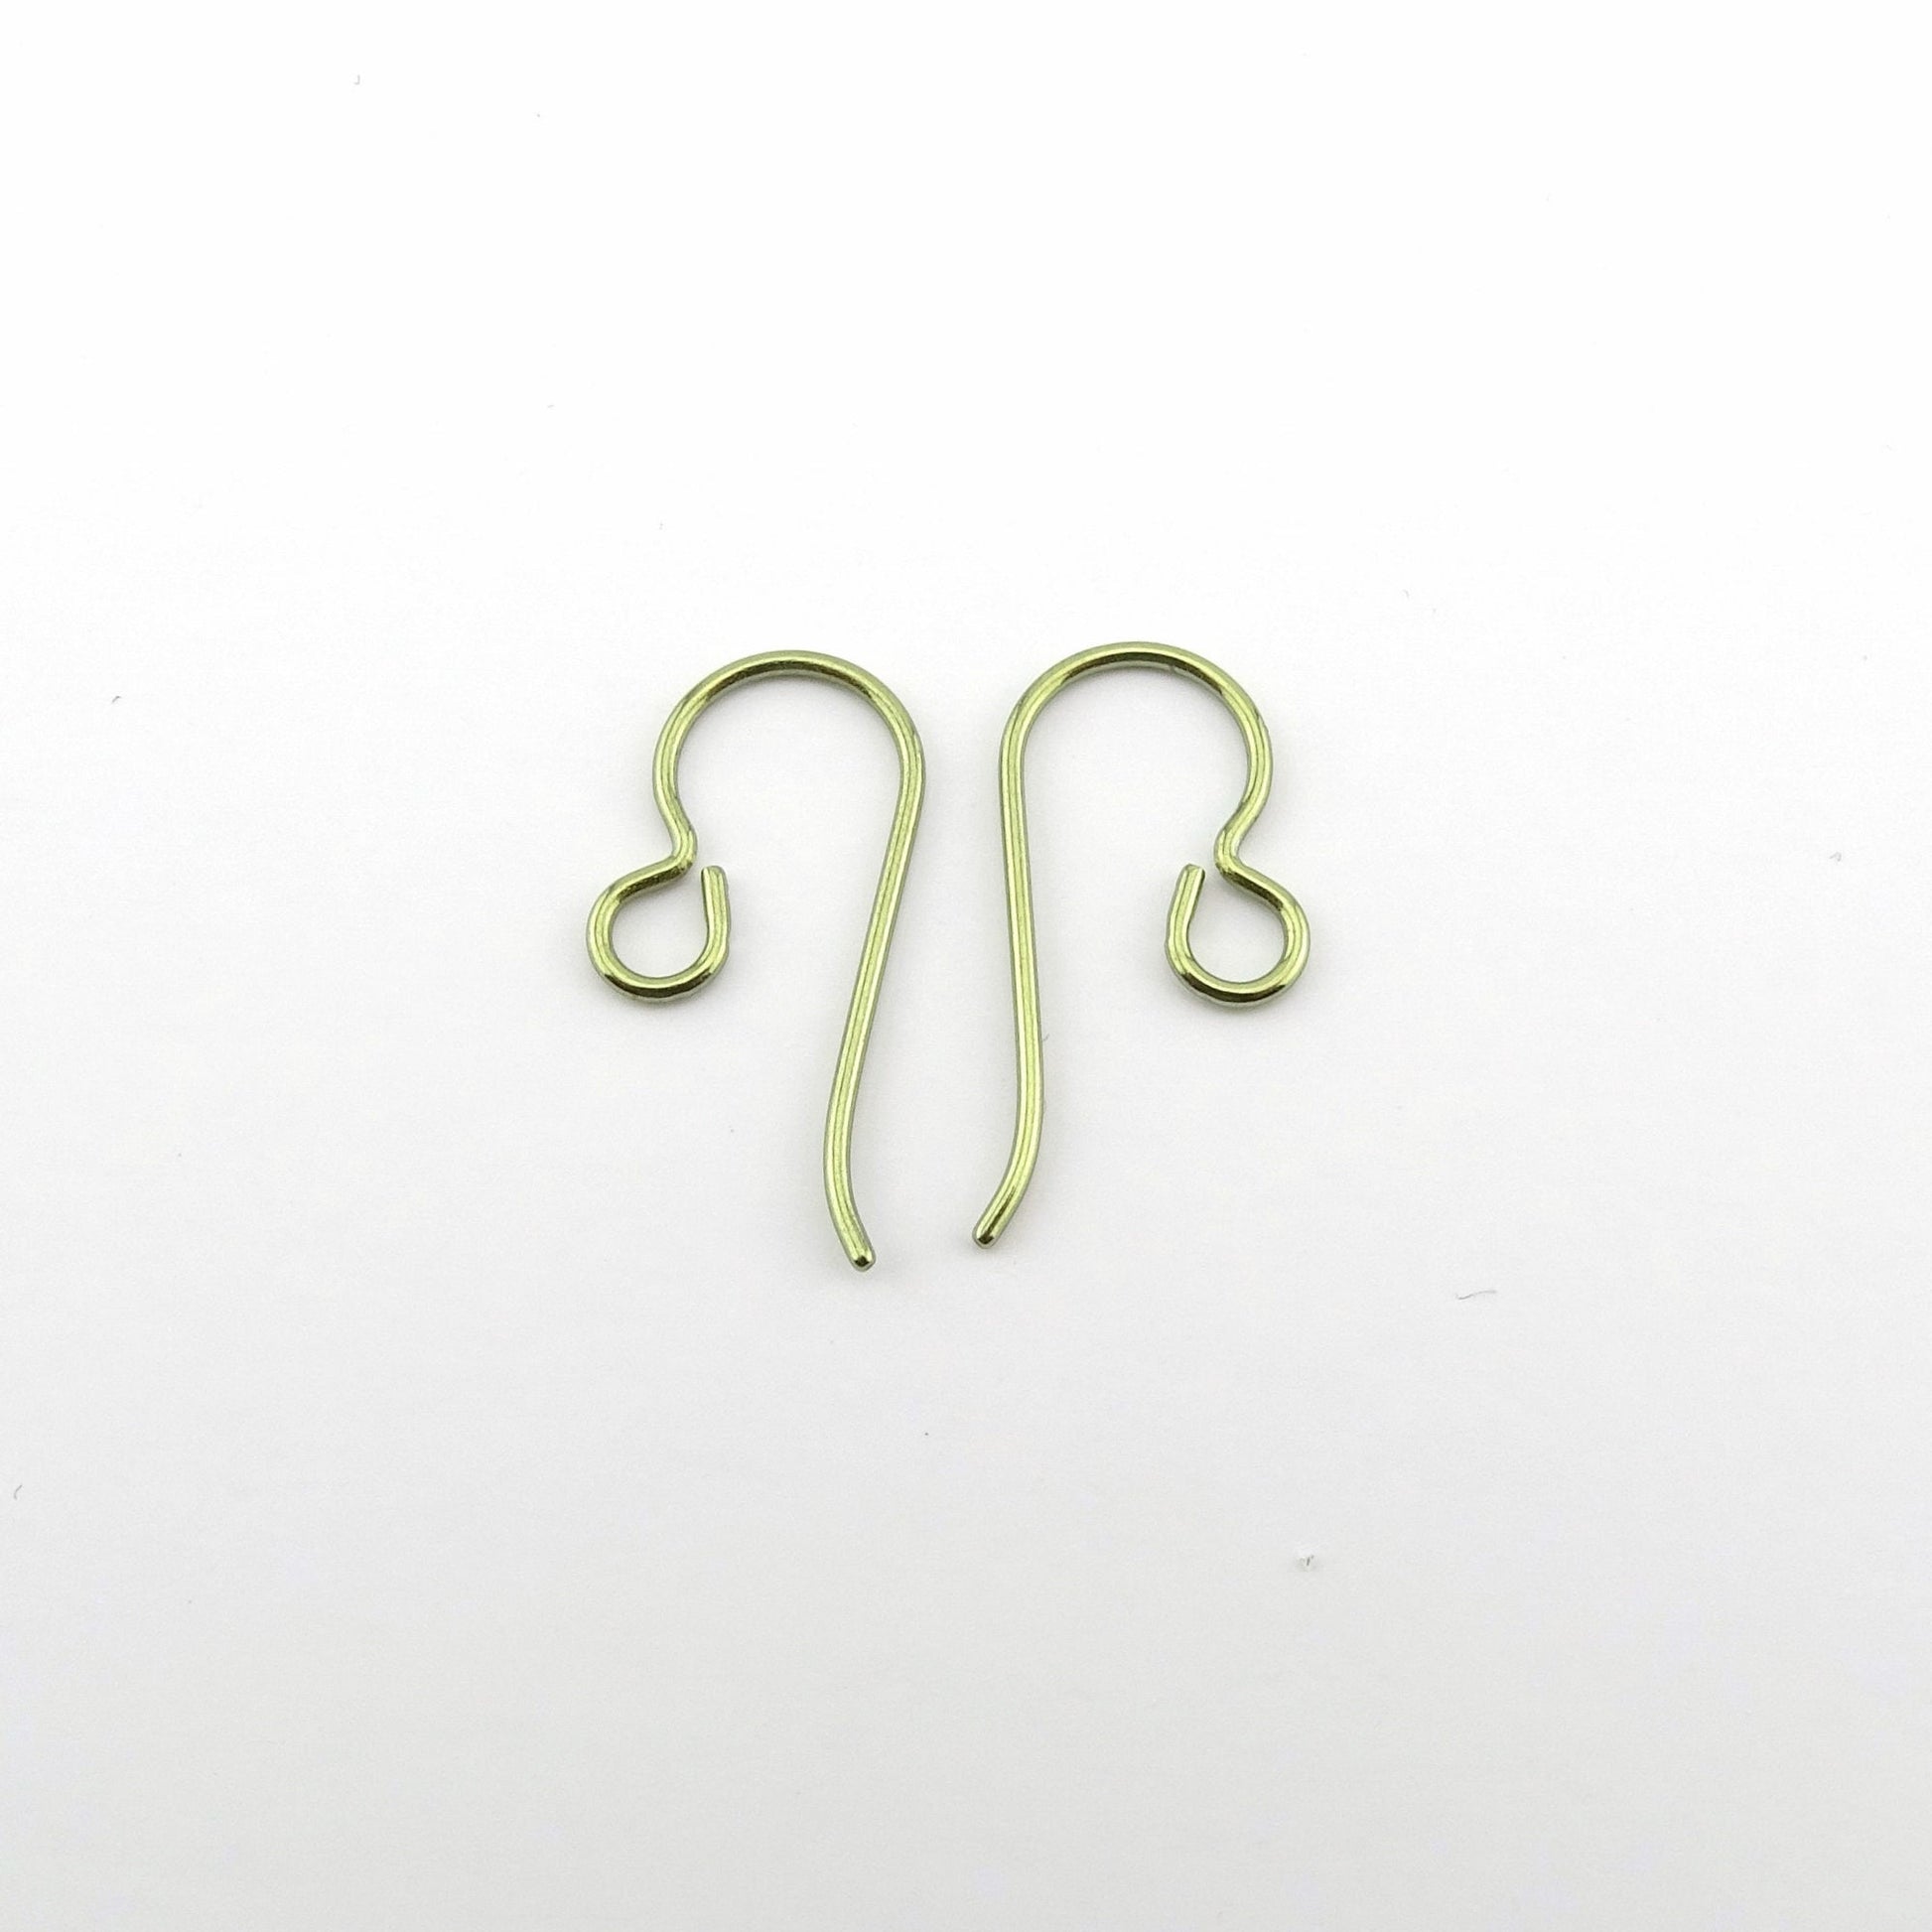 UNICRAFTALE 500pcs Titanium Steel Earring Hooks Metal Ear Wire with Coil  for Jewelry Making 16x27x0.8mm, Hole 2mm 